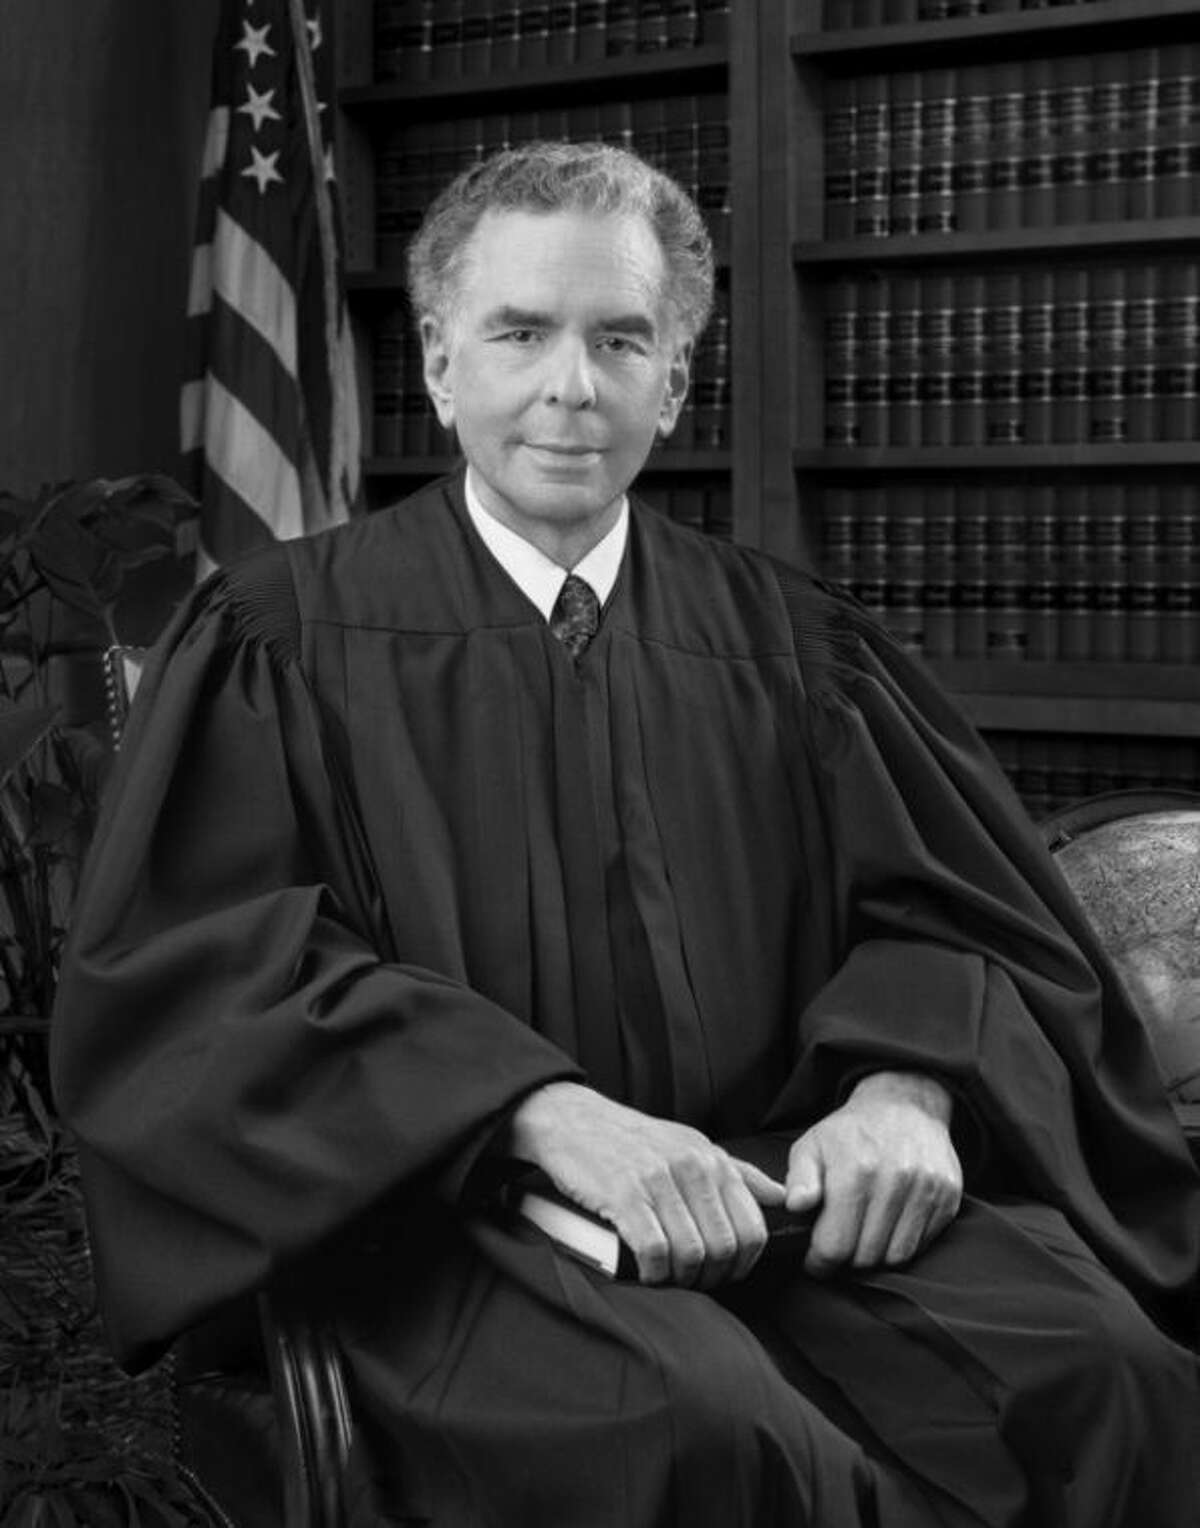 This undated handout photo provided by Judge Edward Korman shows U.S. District Judge Korman of New York. In a scathing rebuke of the Obama administration, a federal judge ruled Friday that age restrictions on over-the-counter sales of the morning-after pill are "arbitrary, capricious and unreasonable" and must end within 30 days. The ruling by Korman means consumers of any age could buy emergency contraception without a prescription _ instead of women first having to prove they're 17 or older, as they do today. And it could allow Plan B One-Step to move out from behind pharmacy counters to the store counters. (AP Photo/Judge Korman's Office)